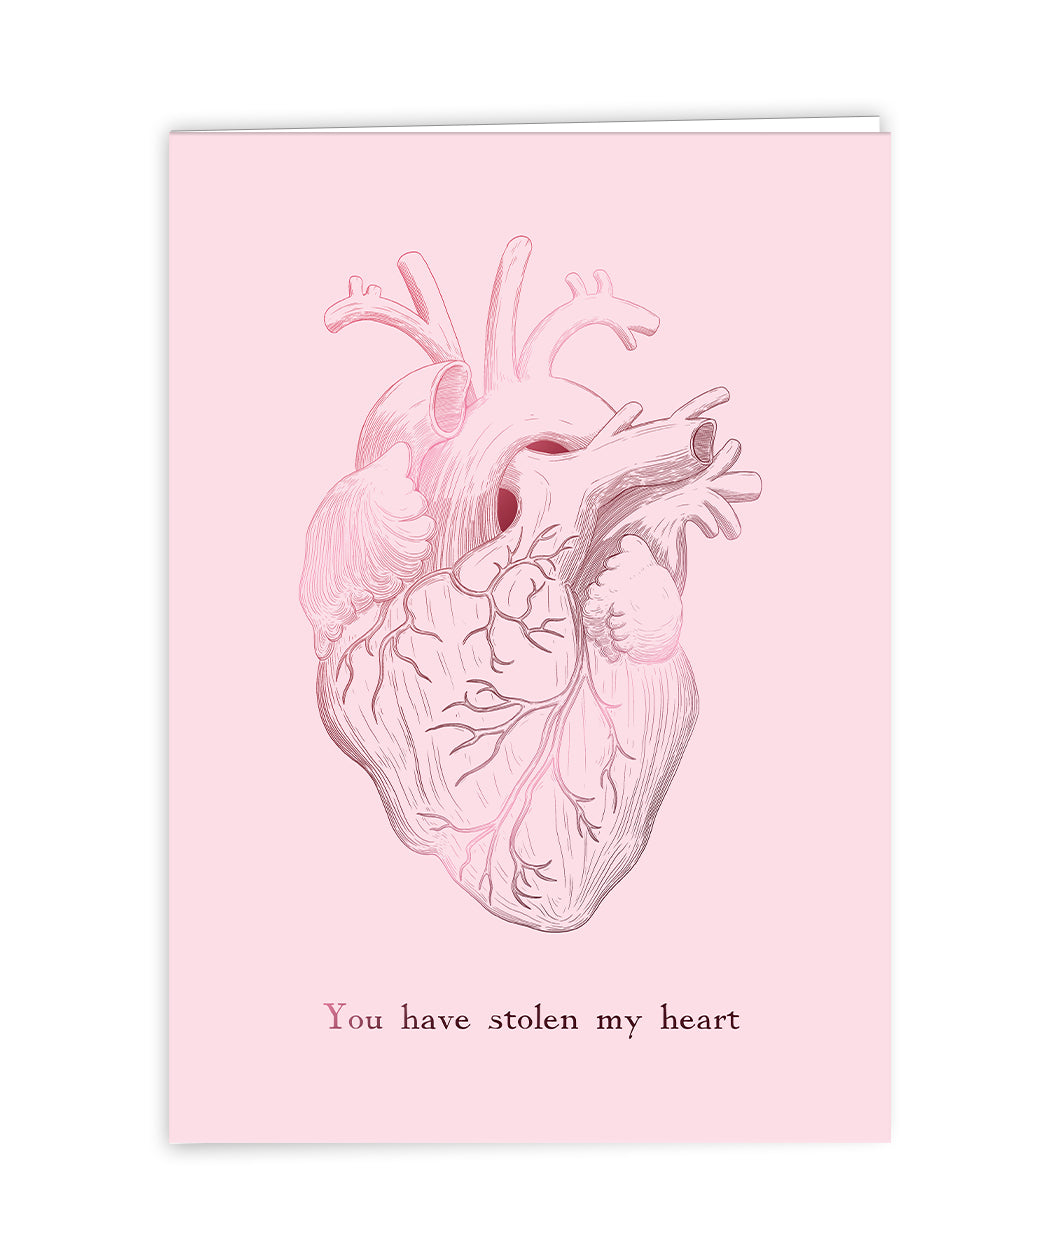 A light pink, vertical card with an illustrated anatomical heart on the front with the text 